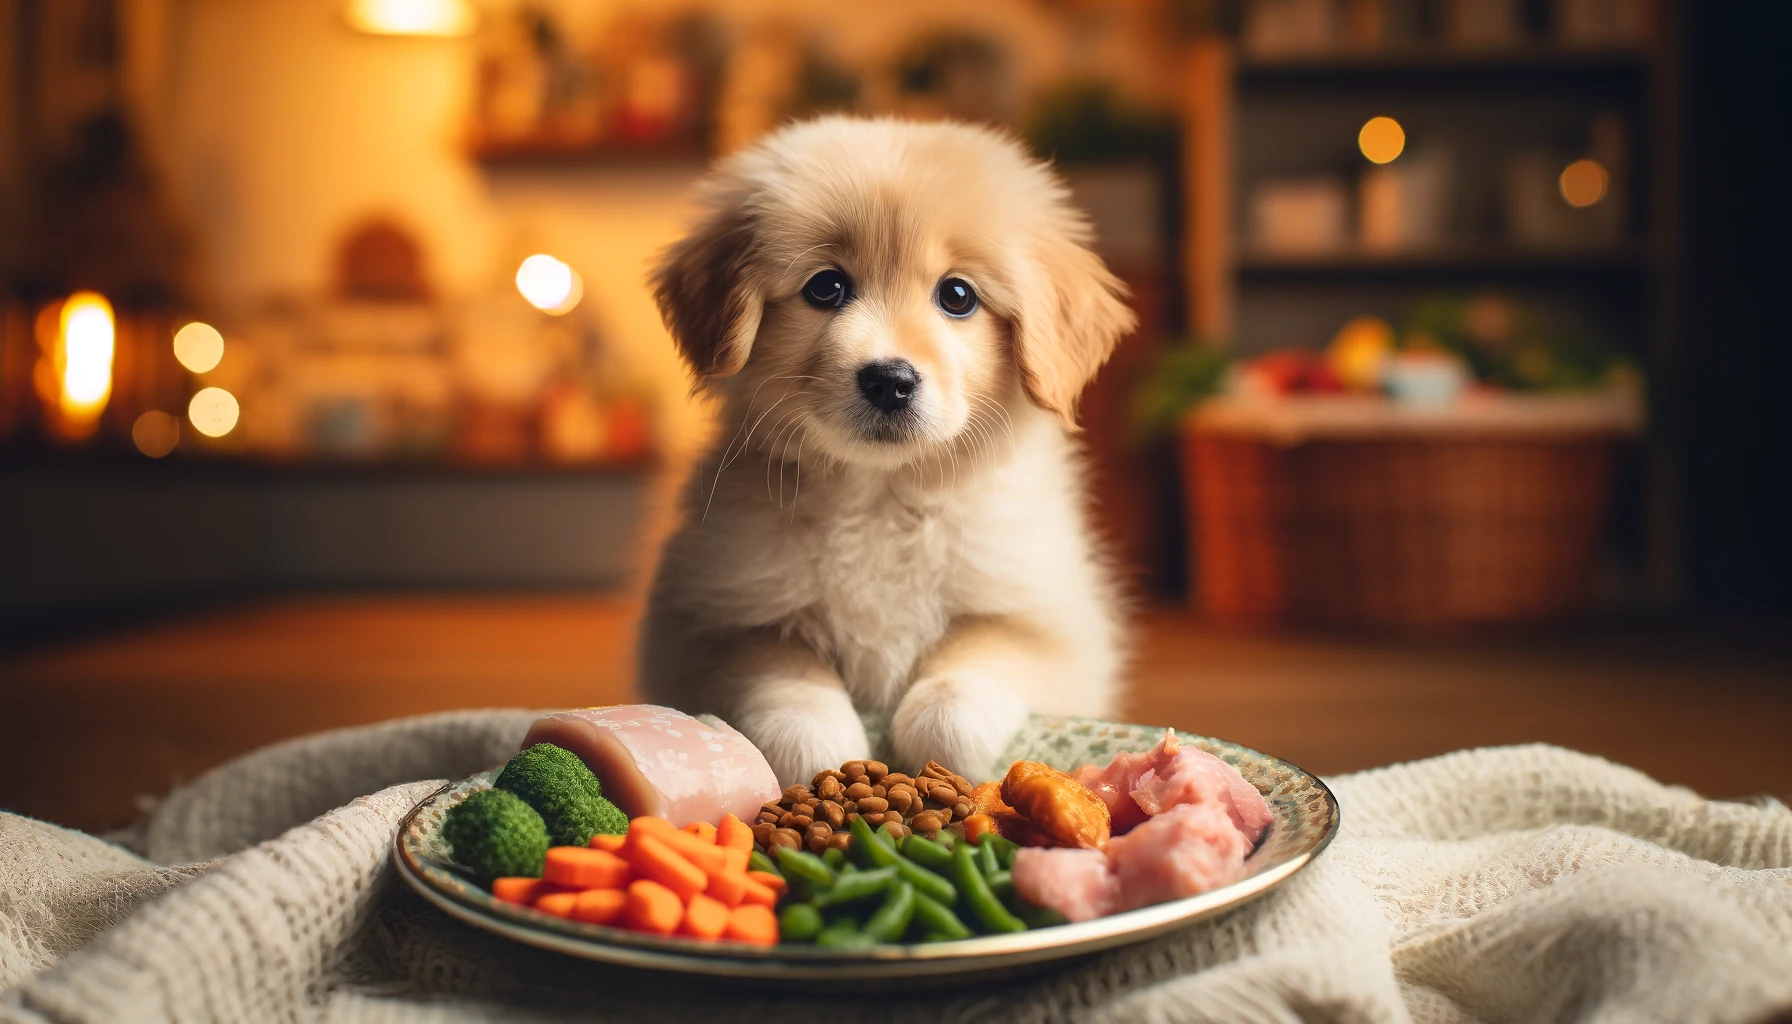 It's some unique Dangerous Foods for Dog to Avoid